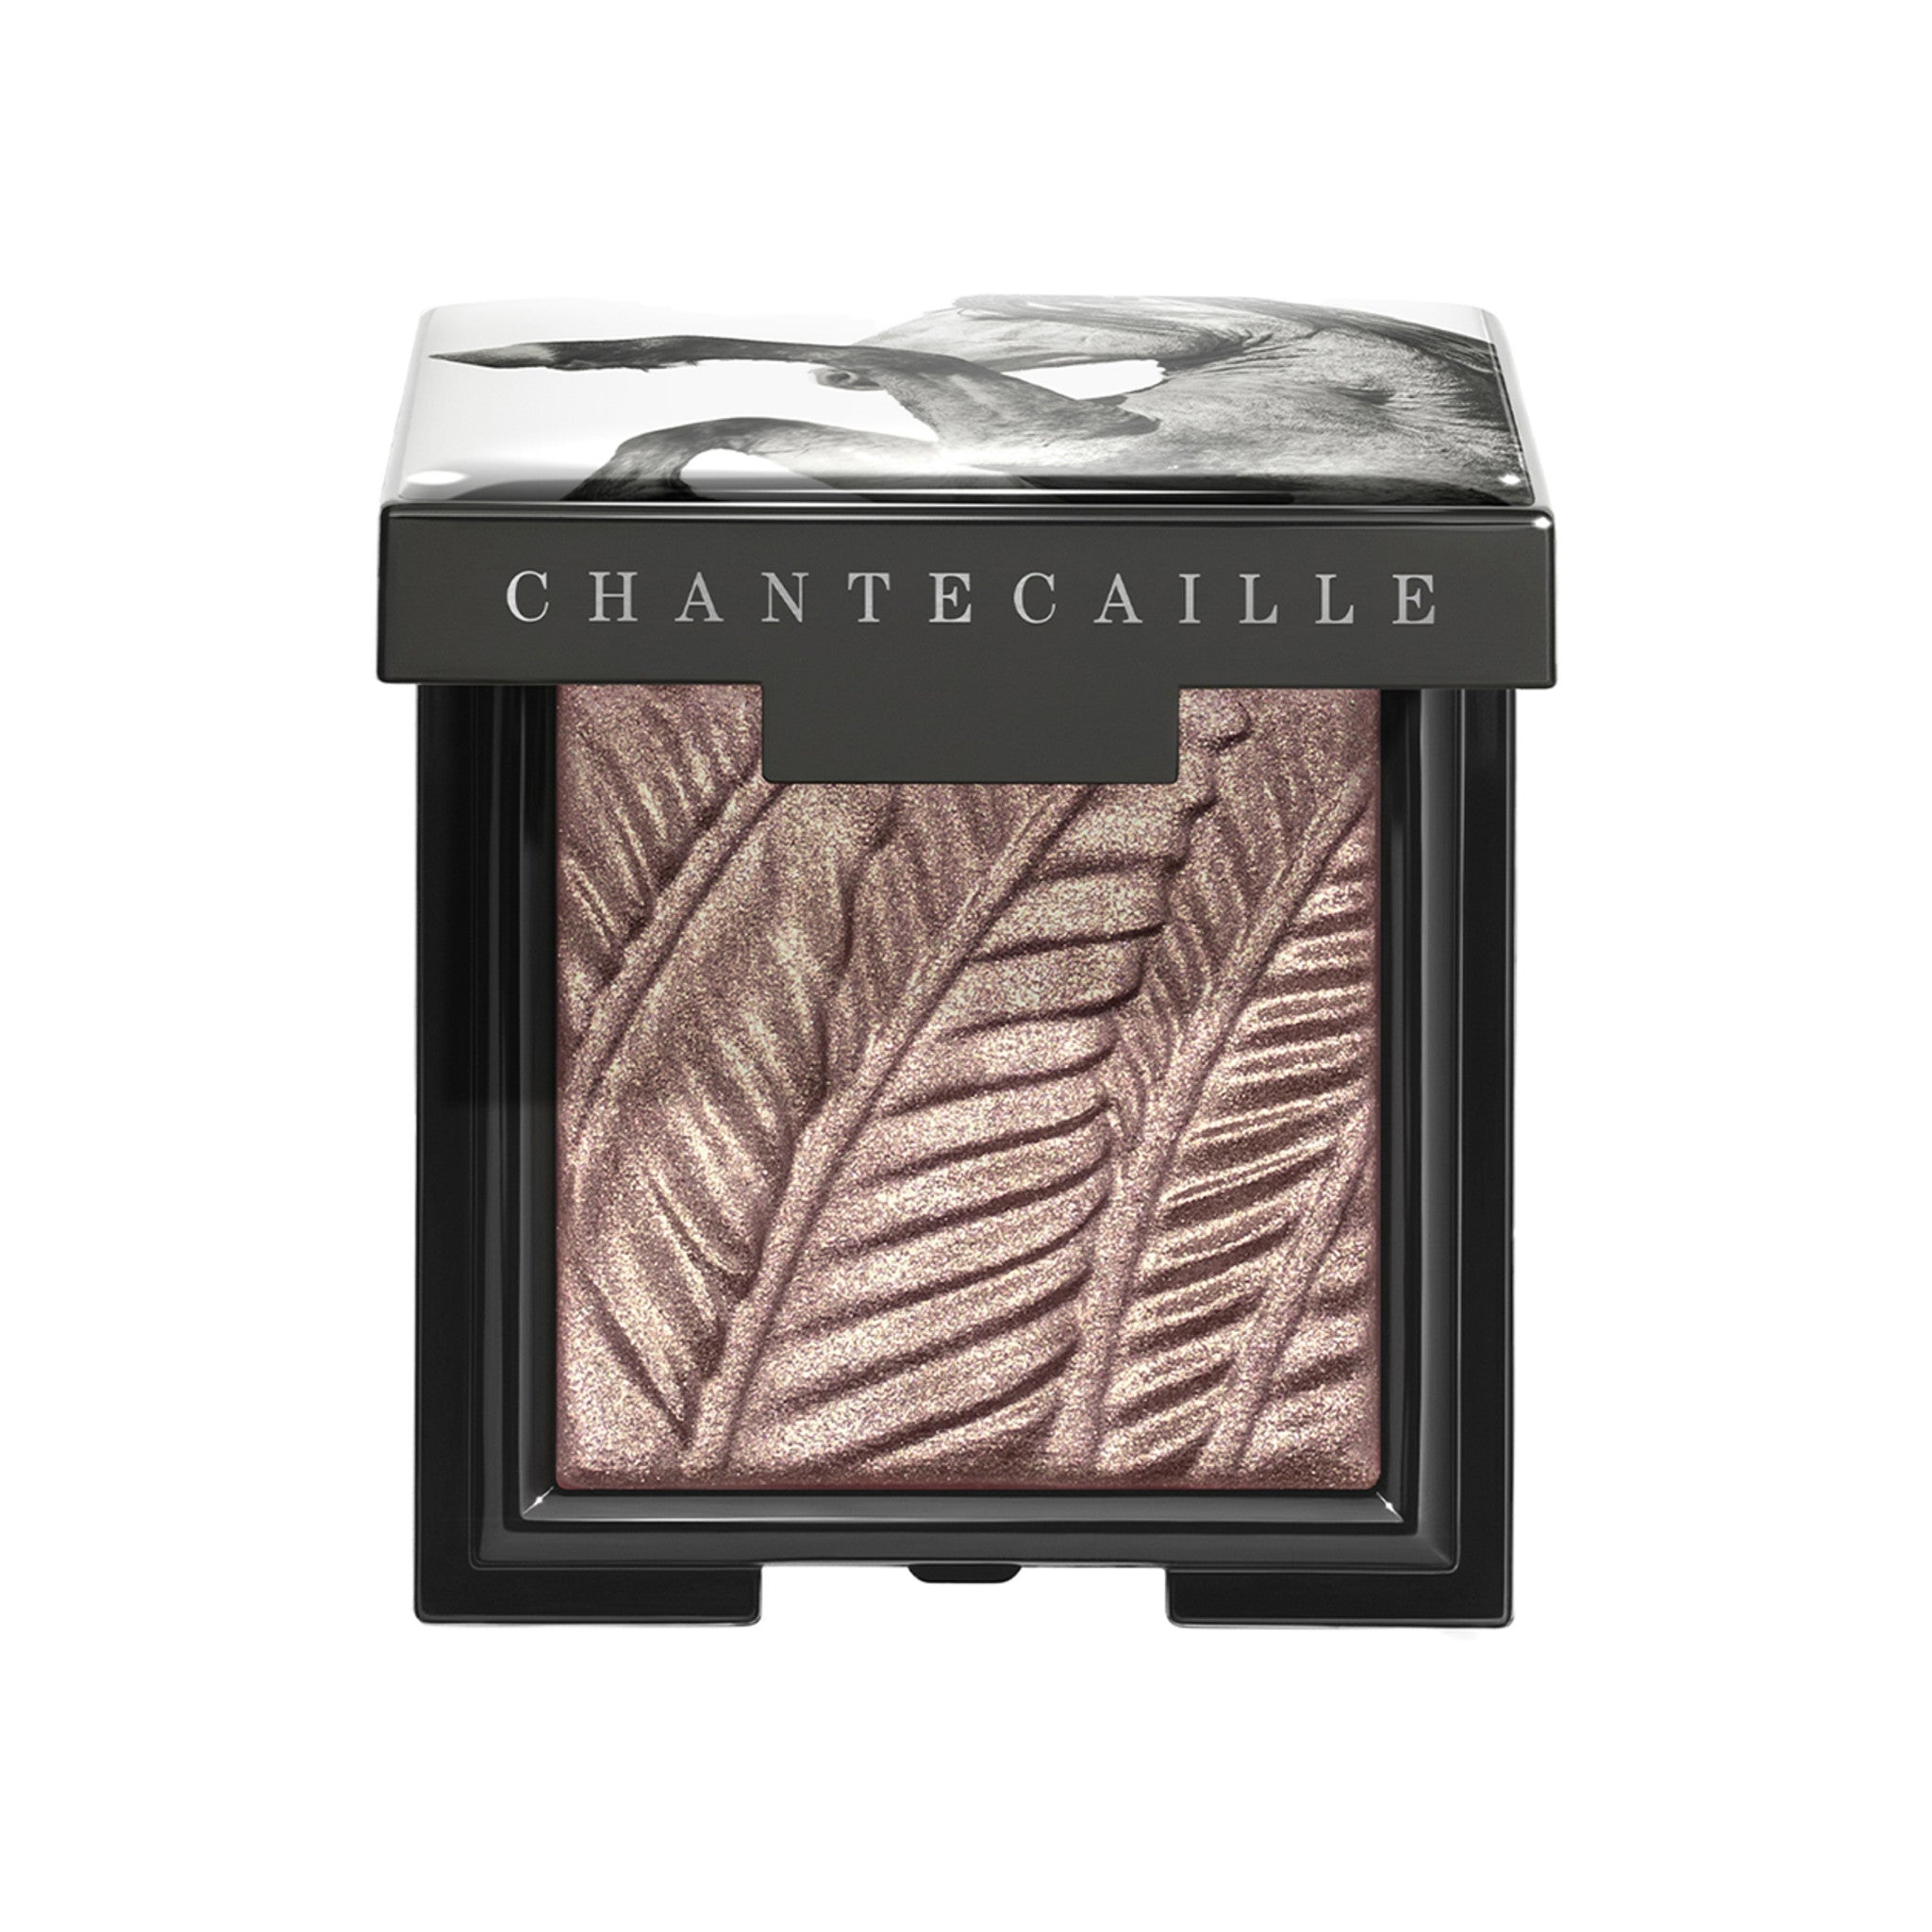 Chantecaille Wild Mustang Luminescent Eye Shade (Limited Edition) Color/Shade variant: Pinto main image.